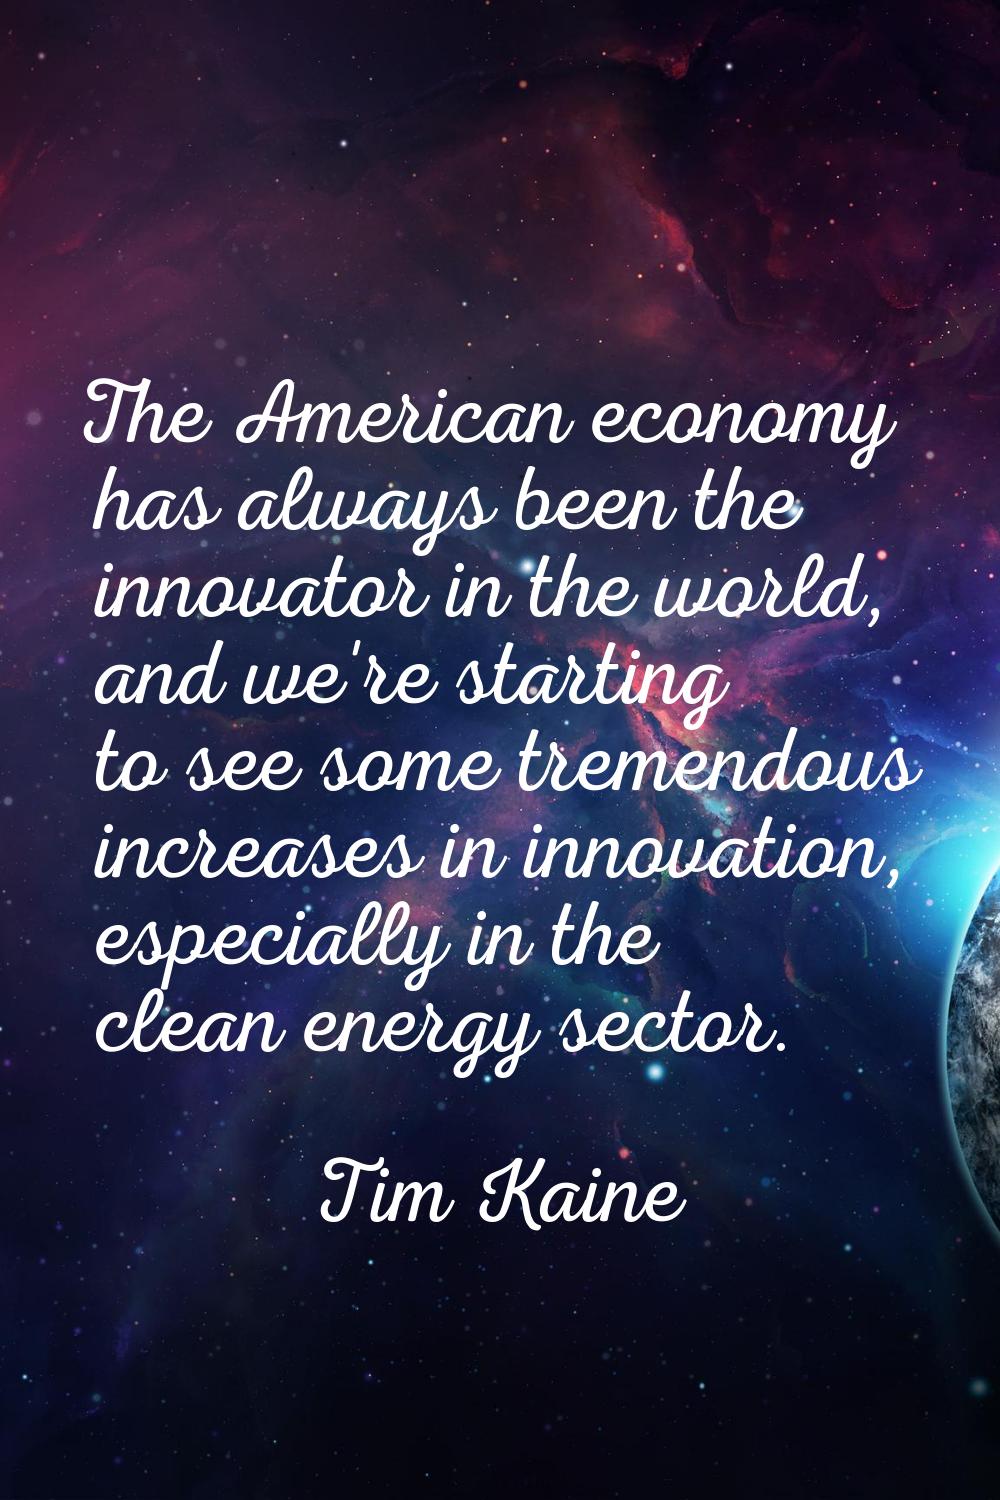 The American economy has always been the innovator in the world, and we're starting to see some tre